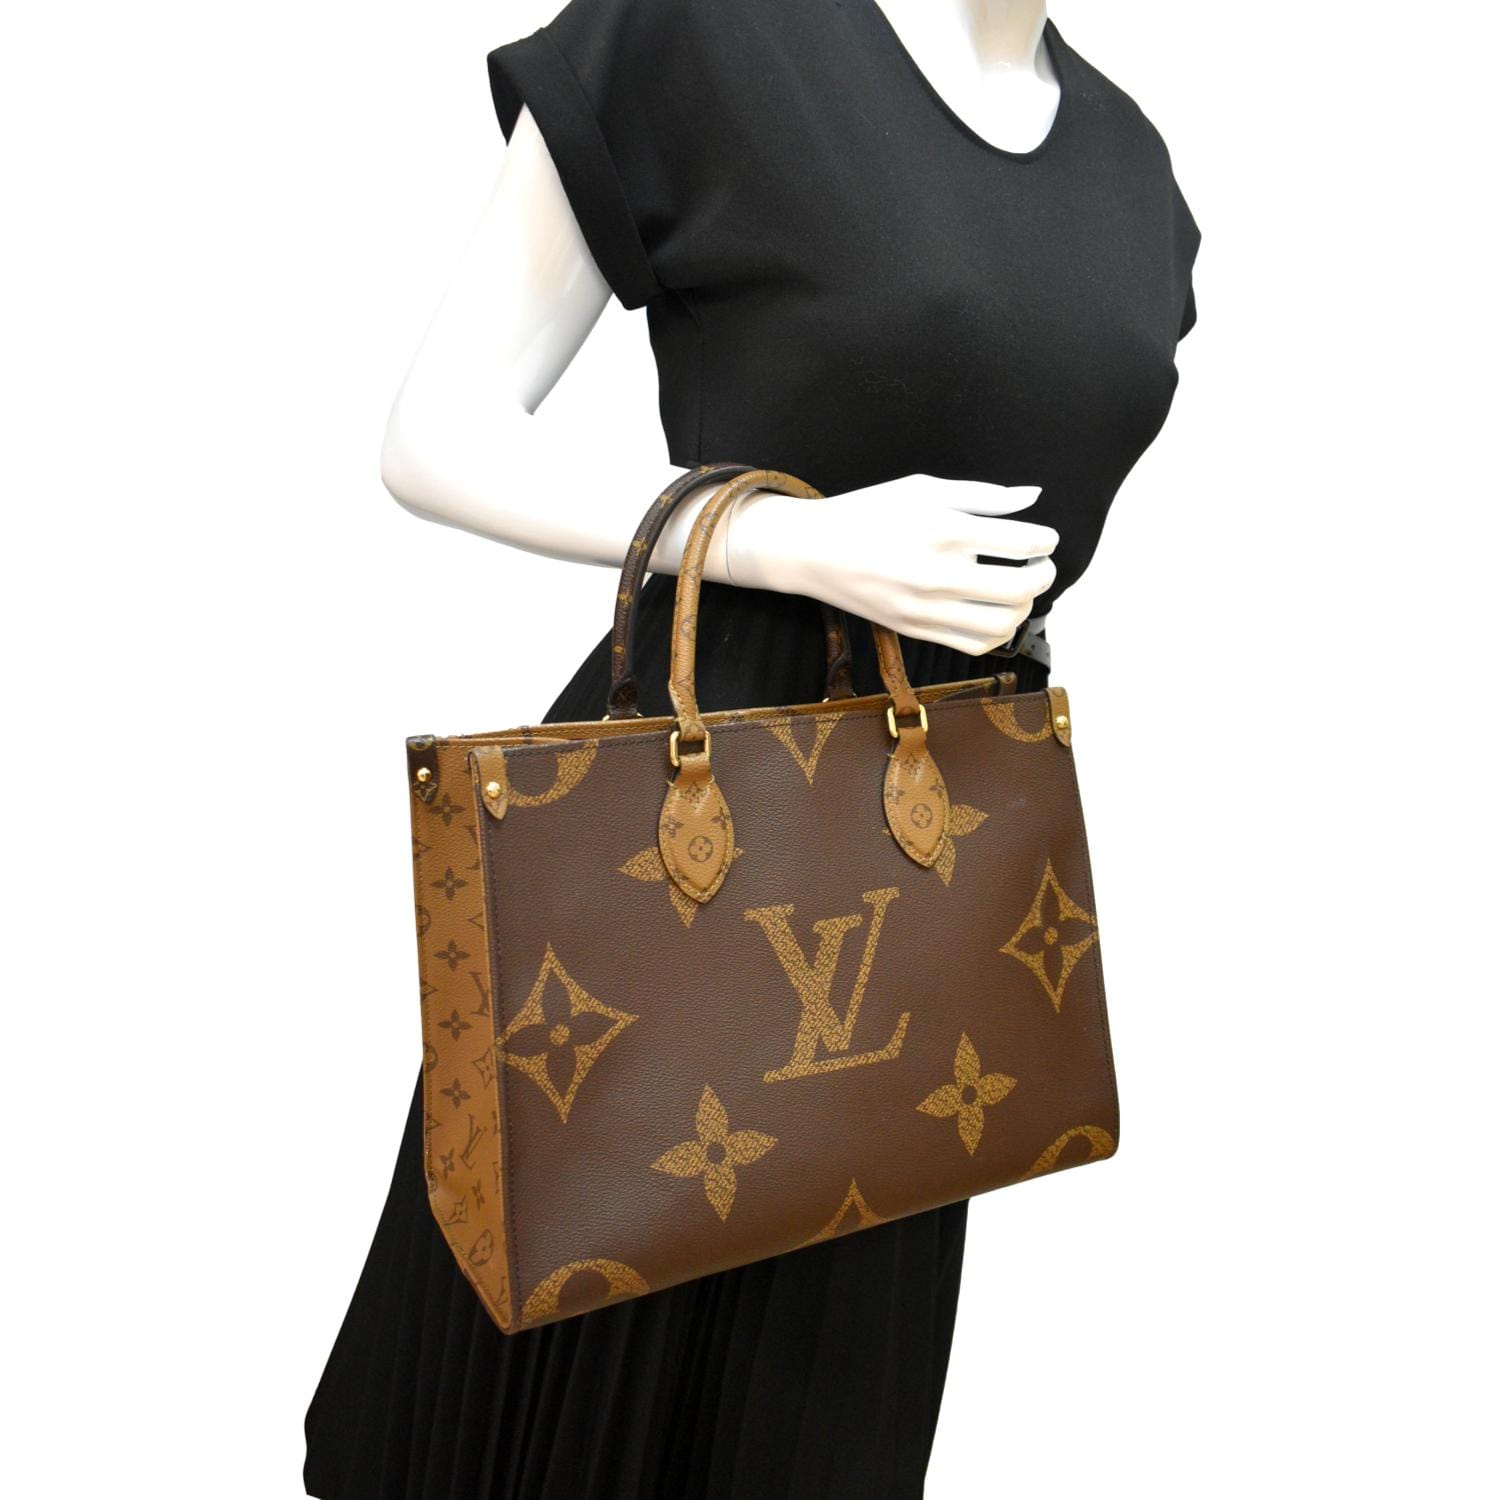 Louis Vuitton pre-owned OntheGo MM Tote Bag - Farfetch